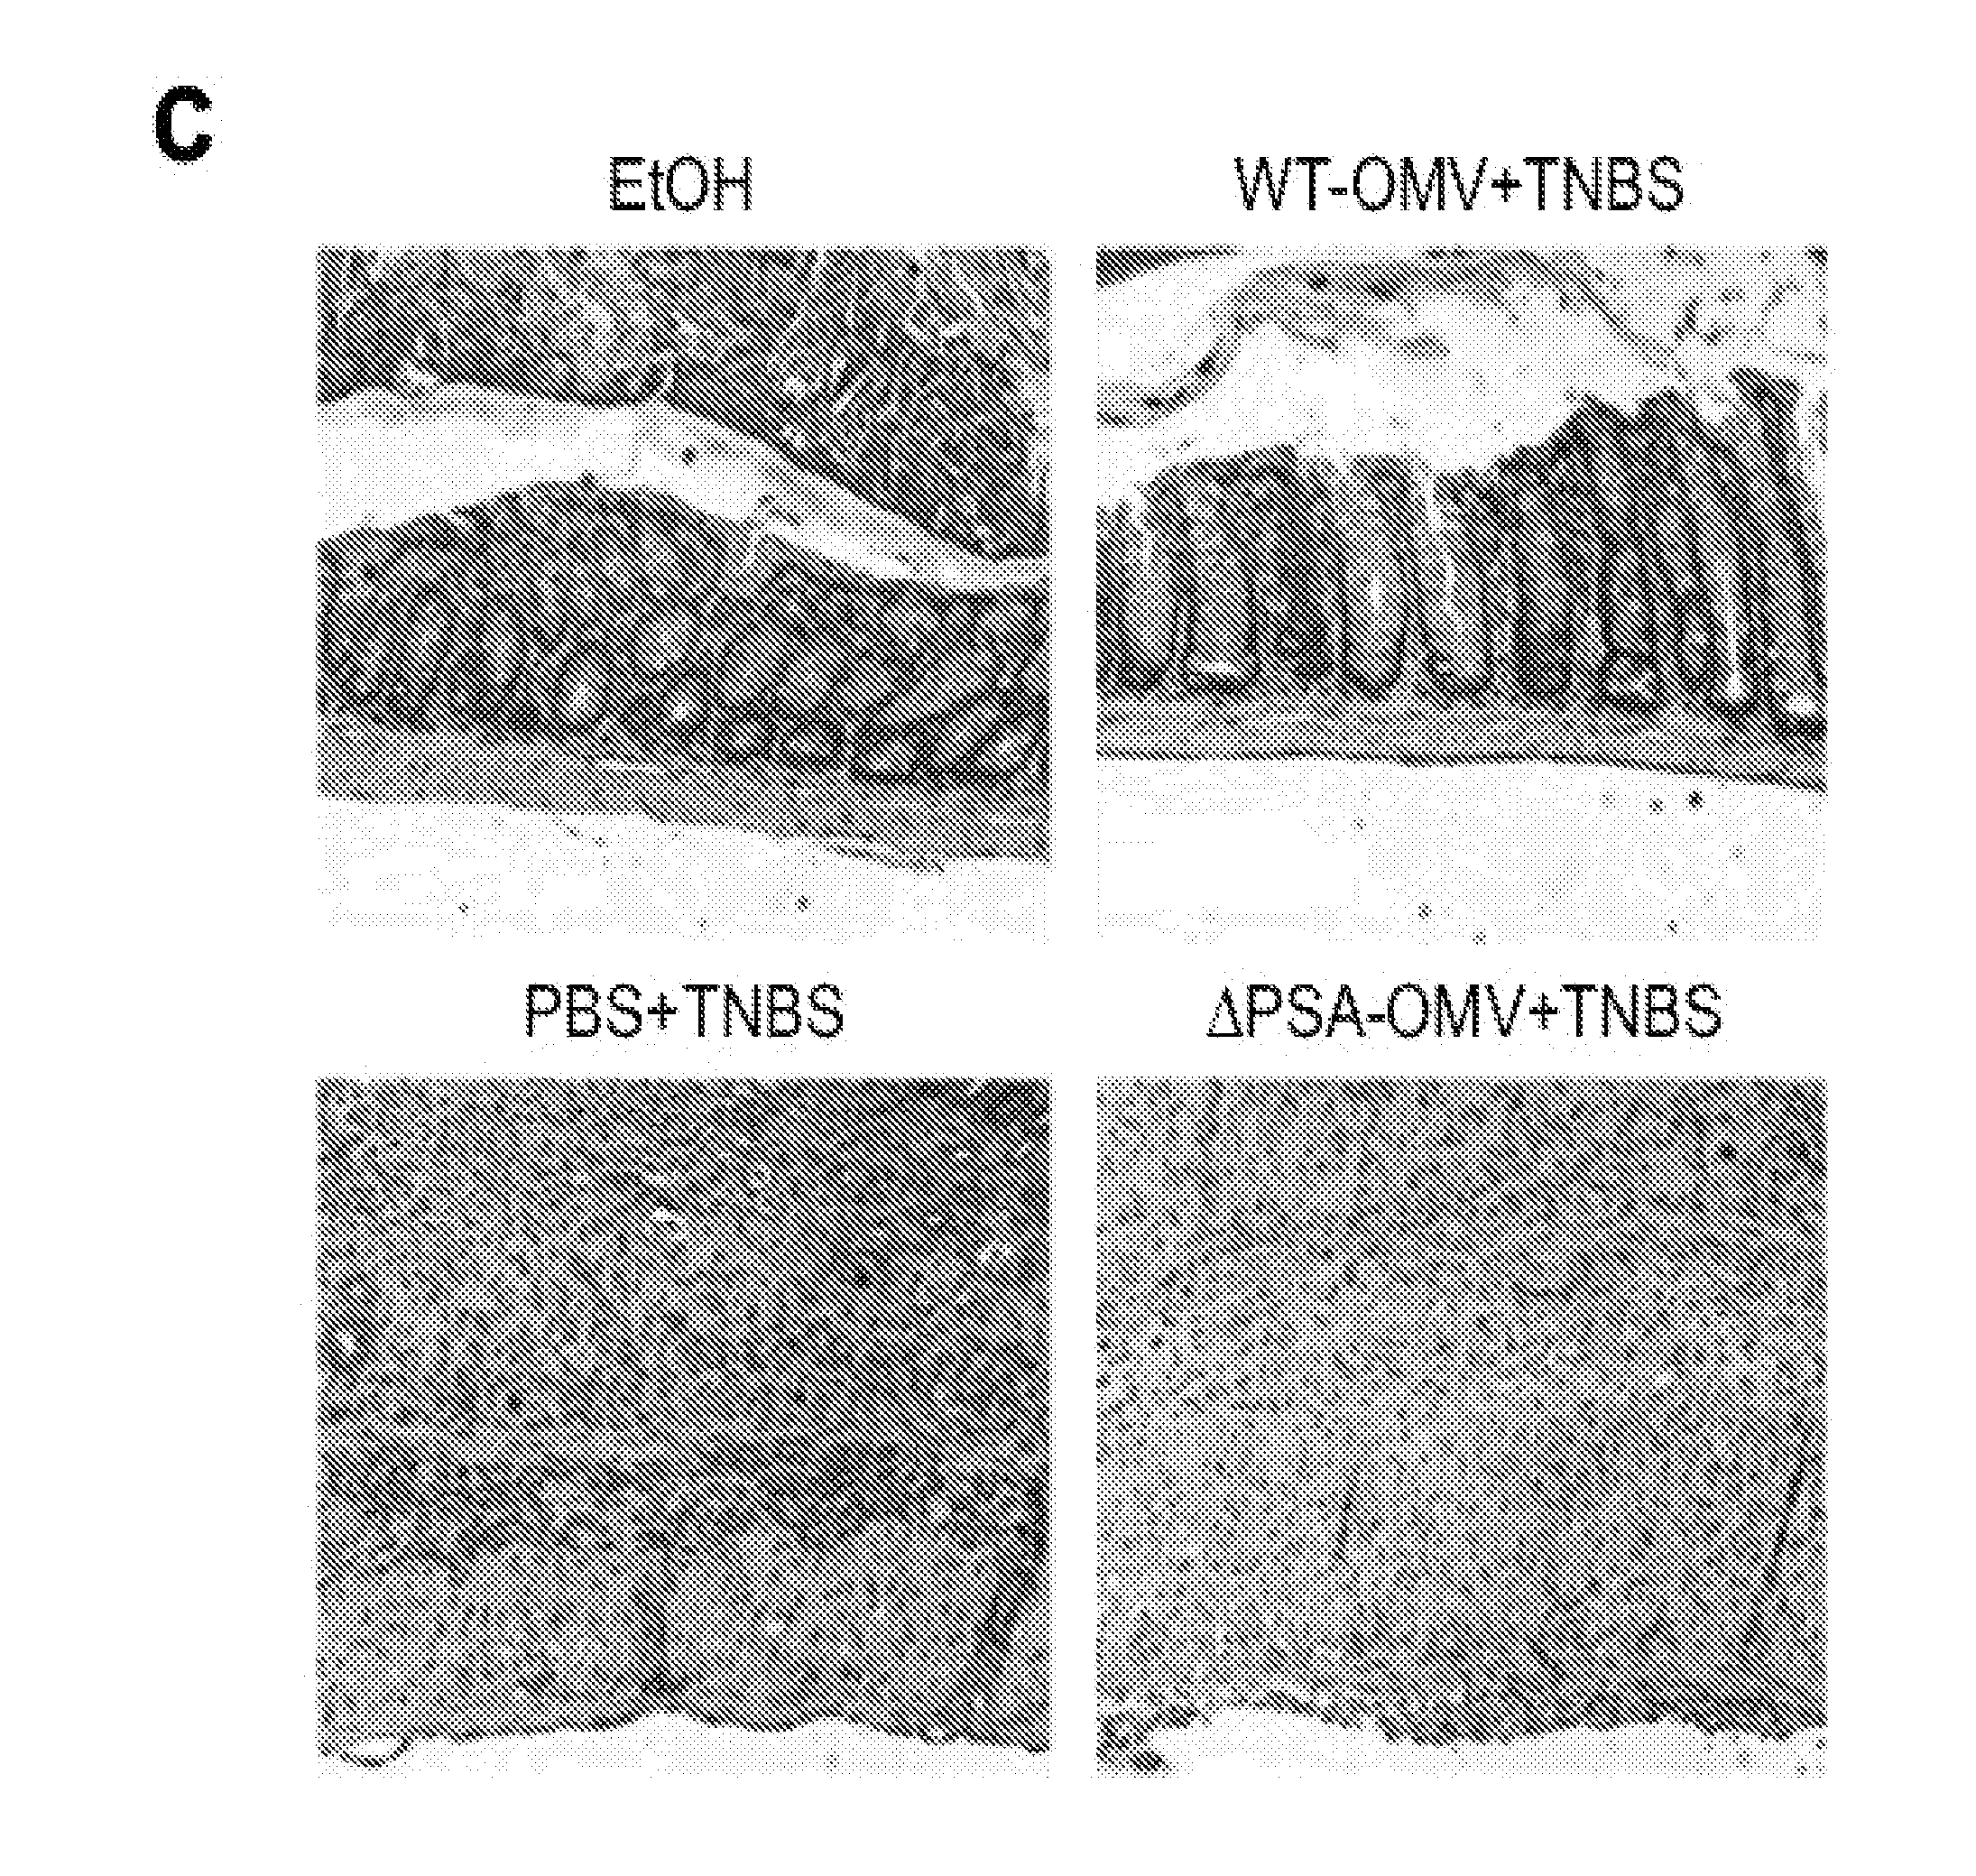 Vehicle for delivering a compound to a mucous membrane and related compositions, methods and systems